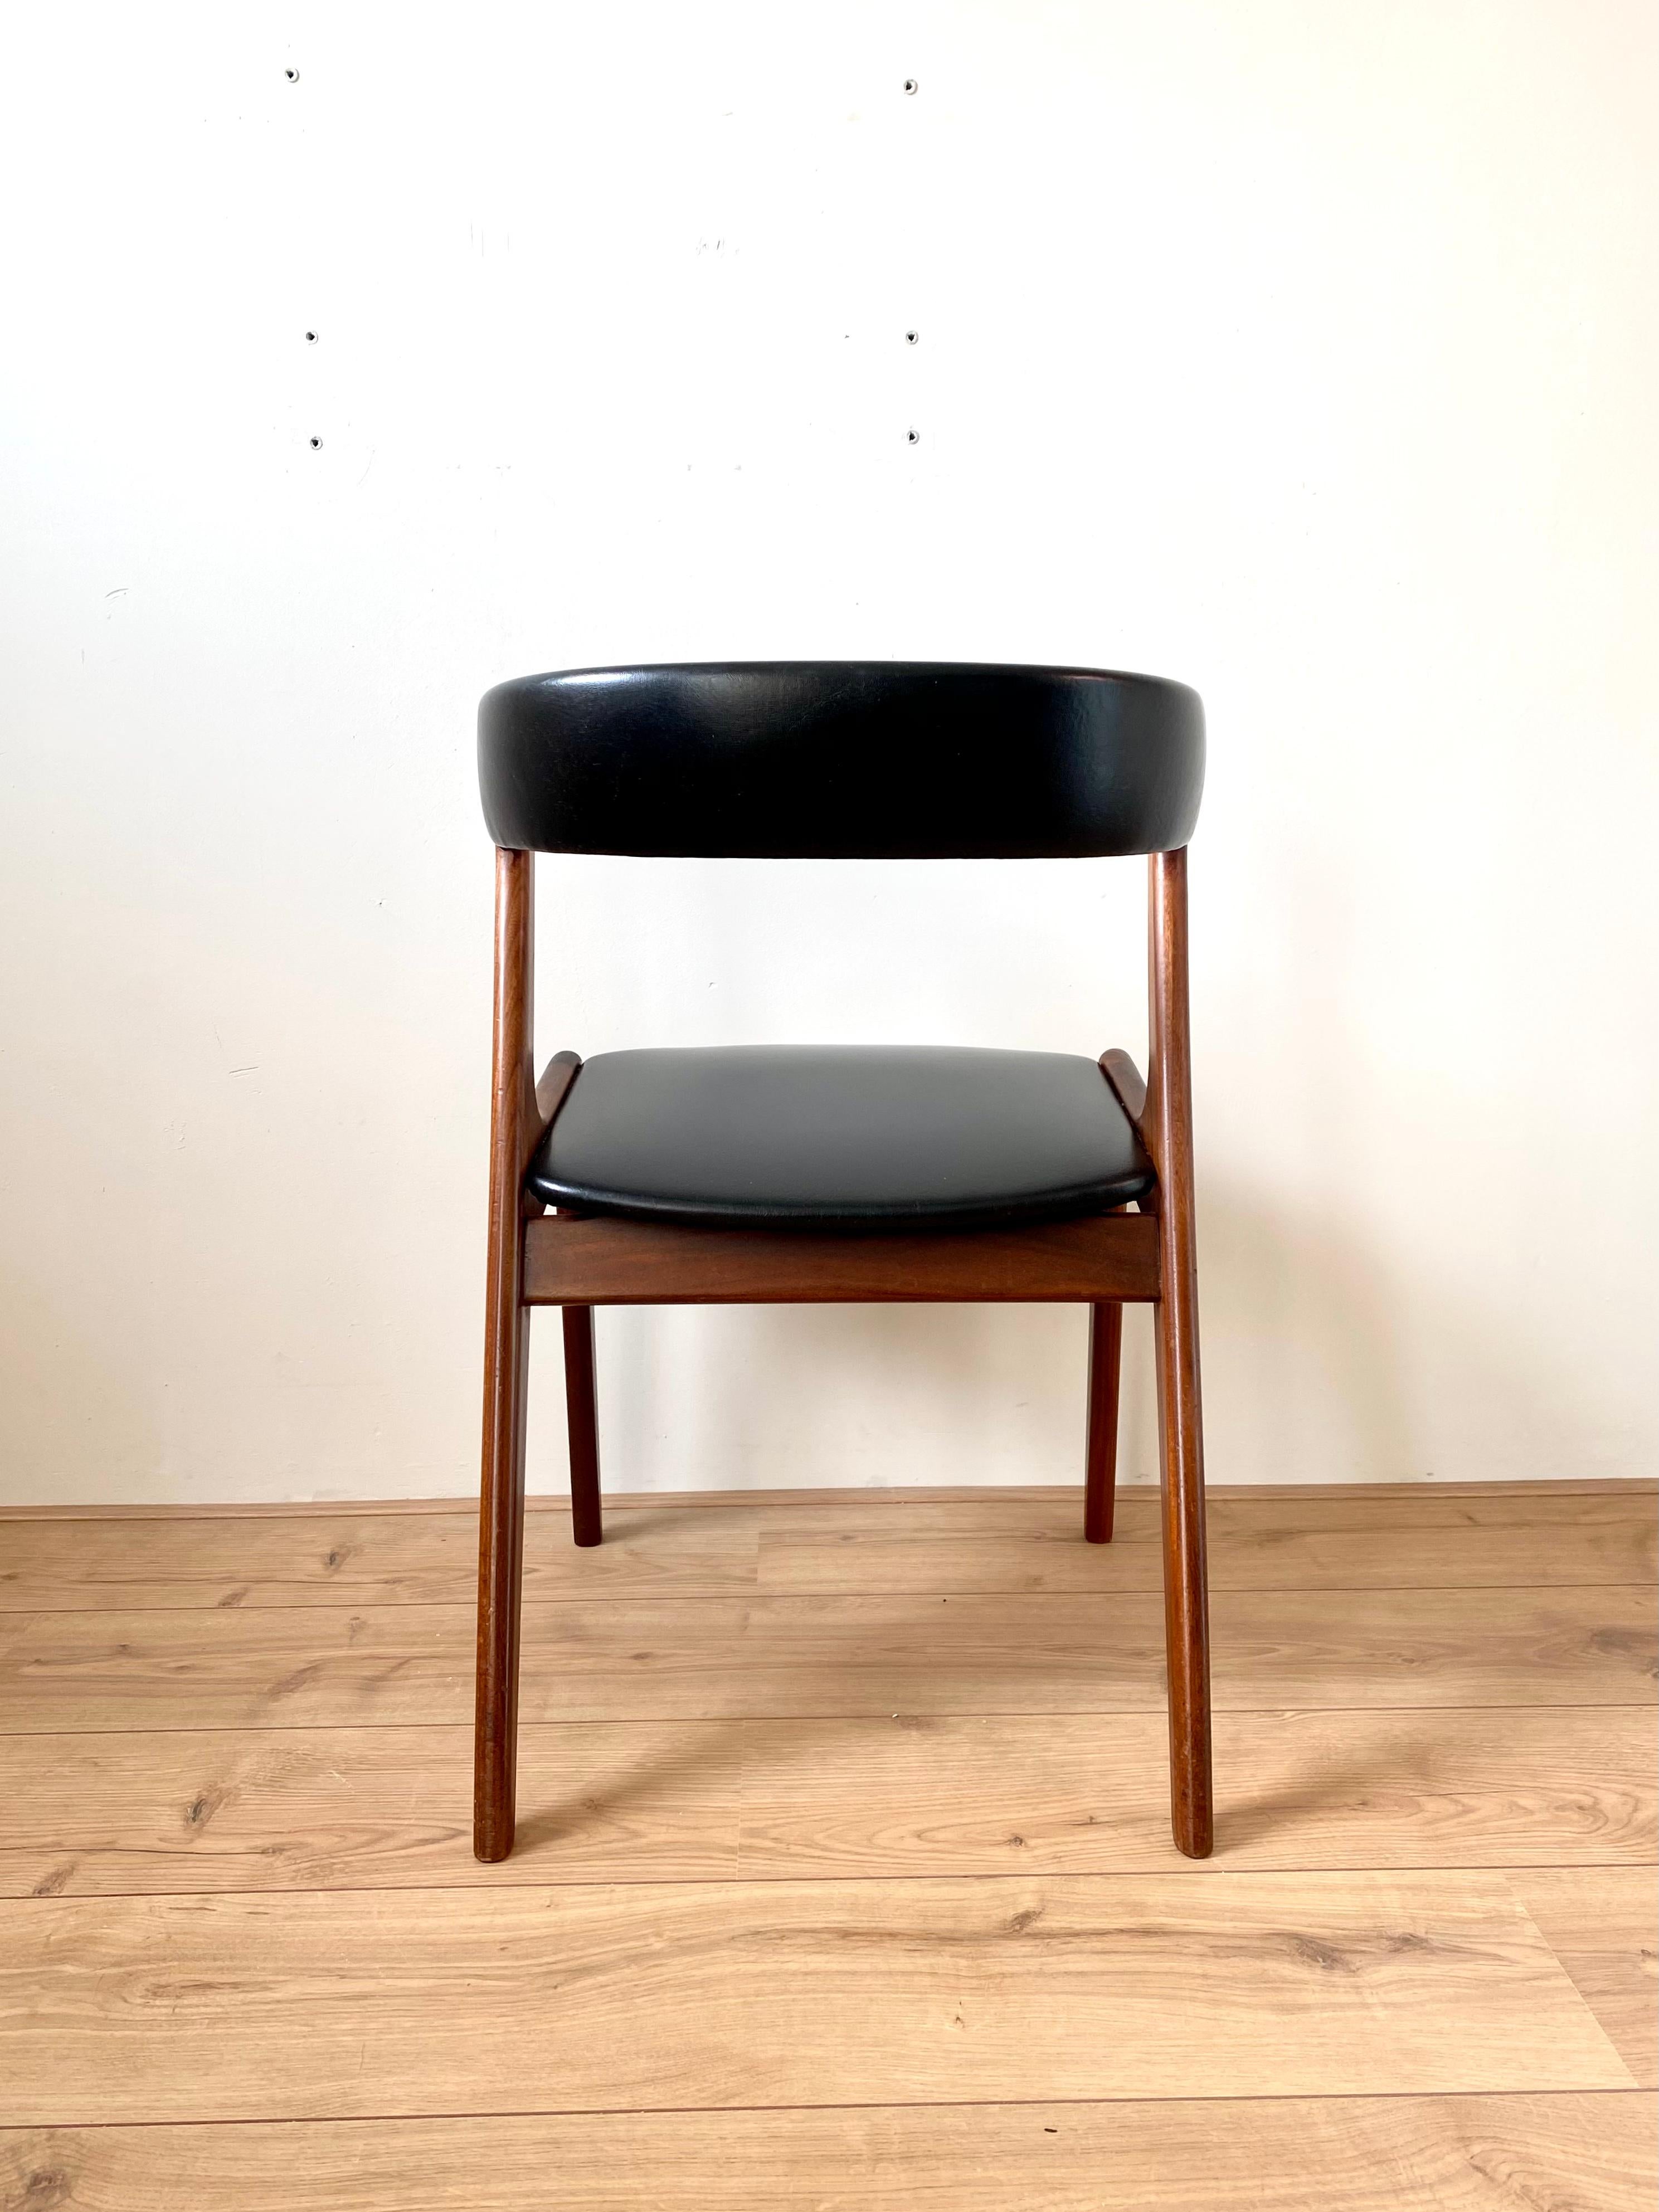 Midcentury Danish Design Dining Chairs By T.H. Harlev for Farstrup Mobler. For Sale 1